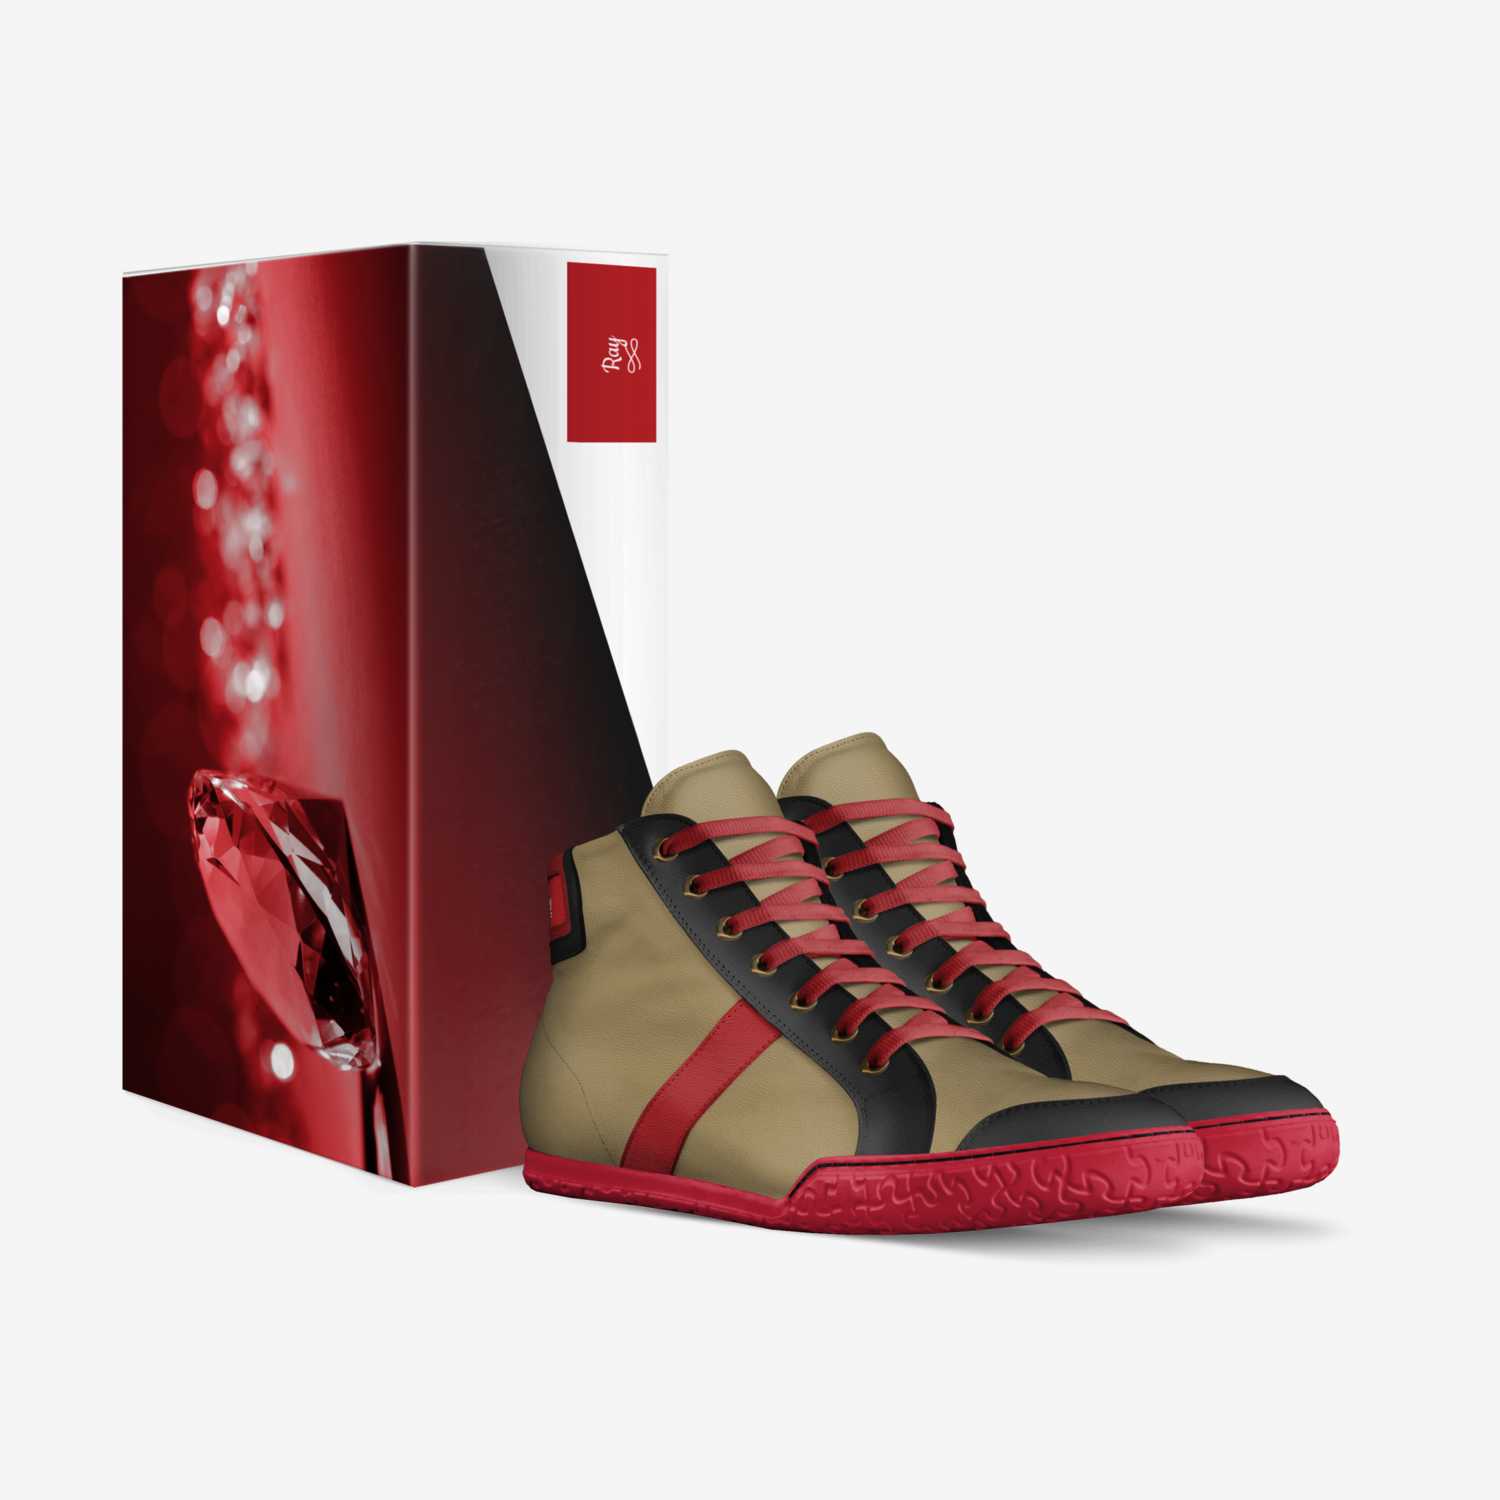 Ray custom made in Italy shoes by Darrick | Box view